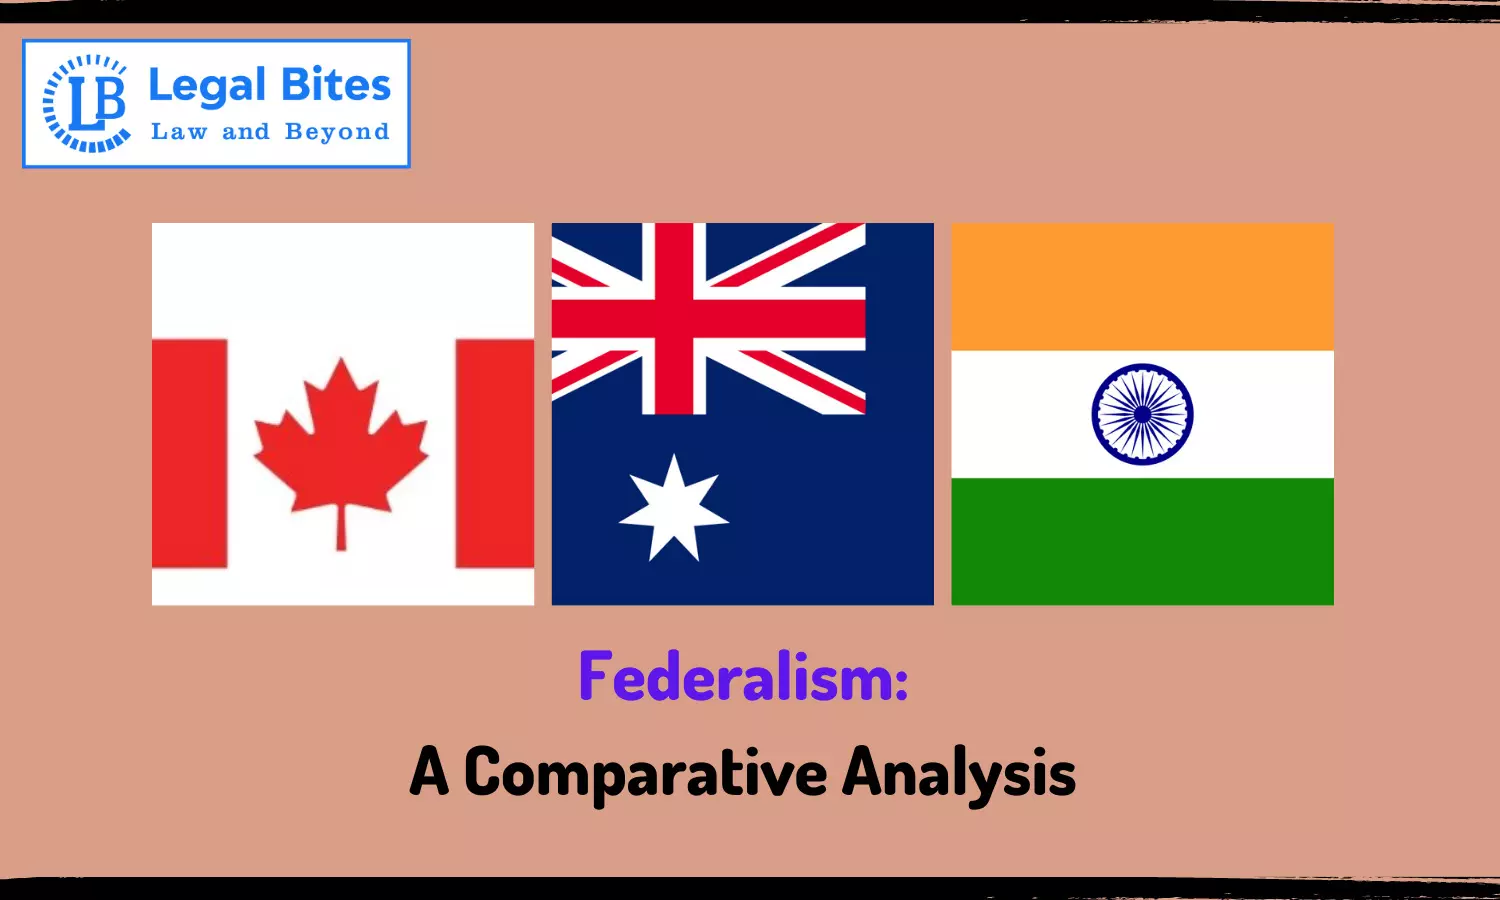 Federalism: A Comparative Analysis of Canada, Australia, and India